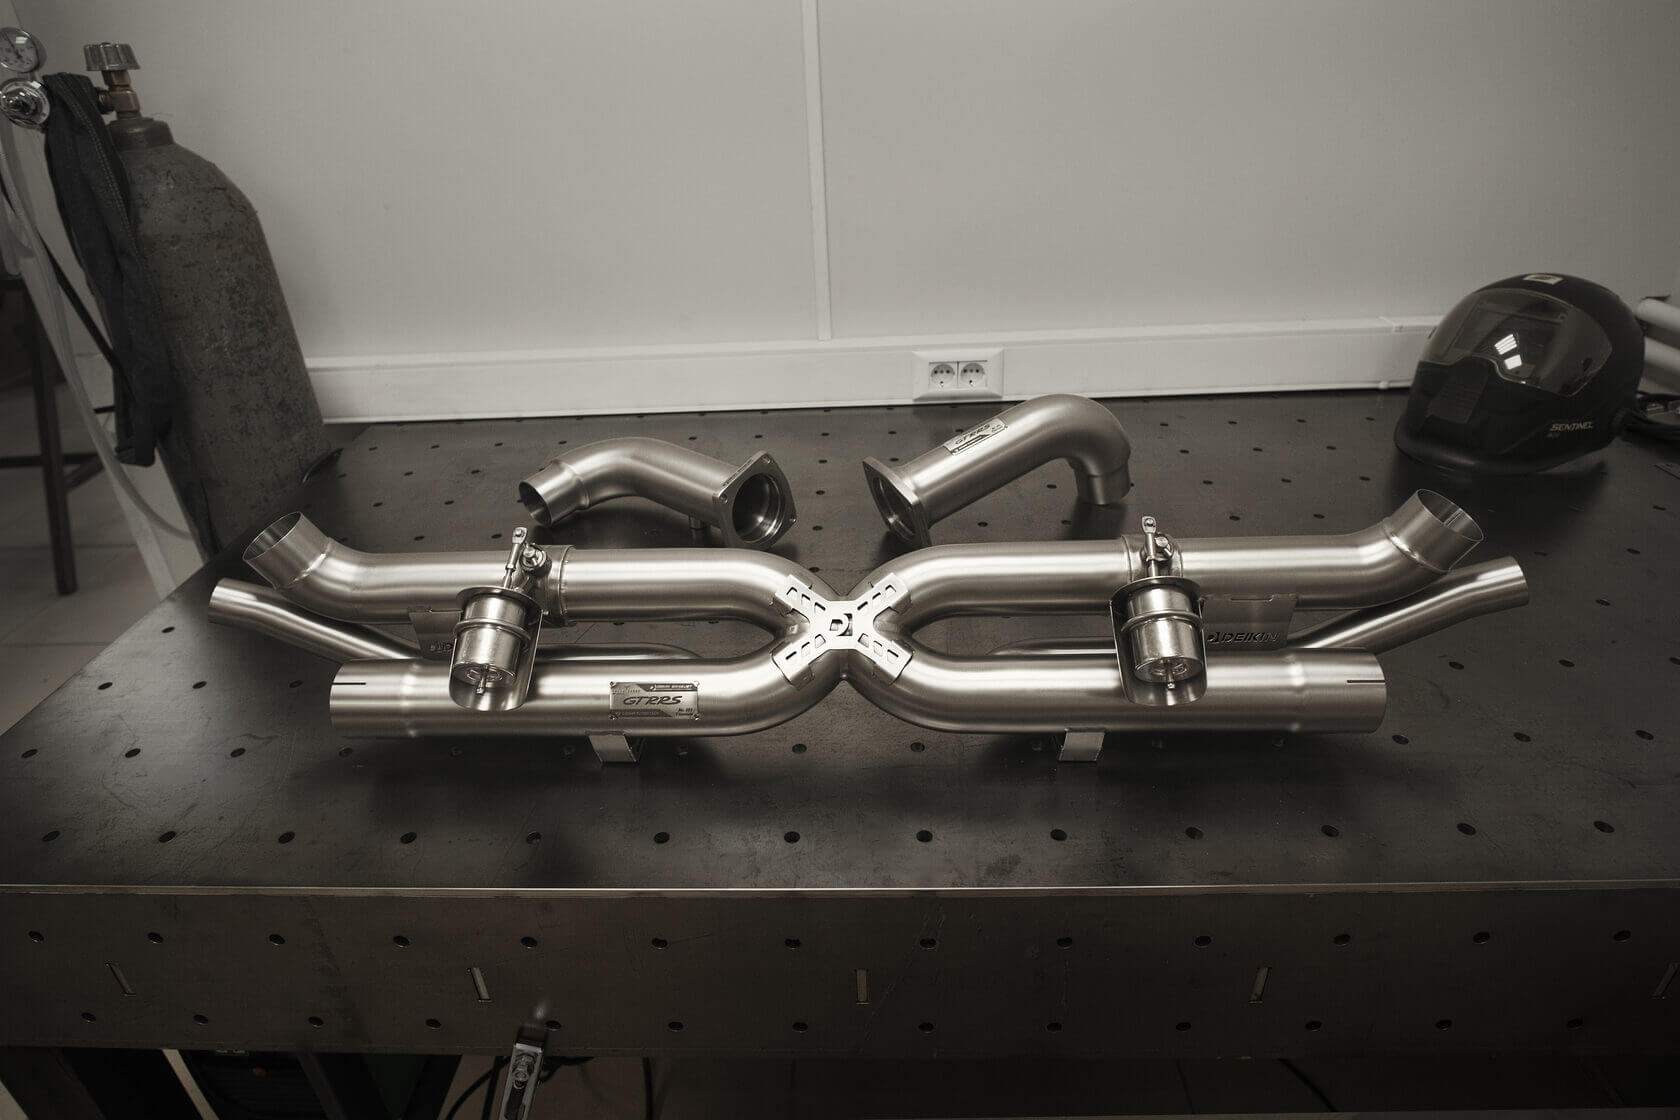 DEIKIN 10-PO.911.T/TS.991.2/R-ES-Ti-00 Exhaust system "Race" Titan for Porsche 911 Turbo/Turbo S (991.2) complete with downpipes without HeatShield Photo-4 